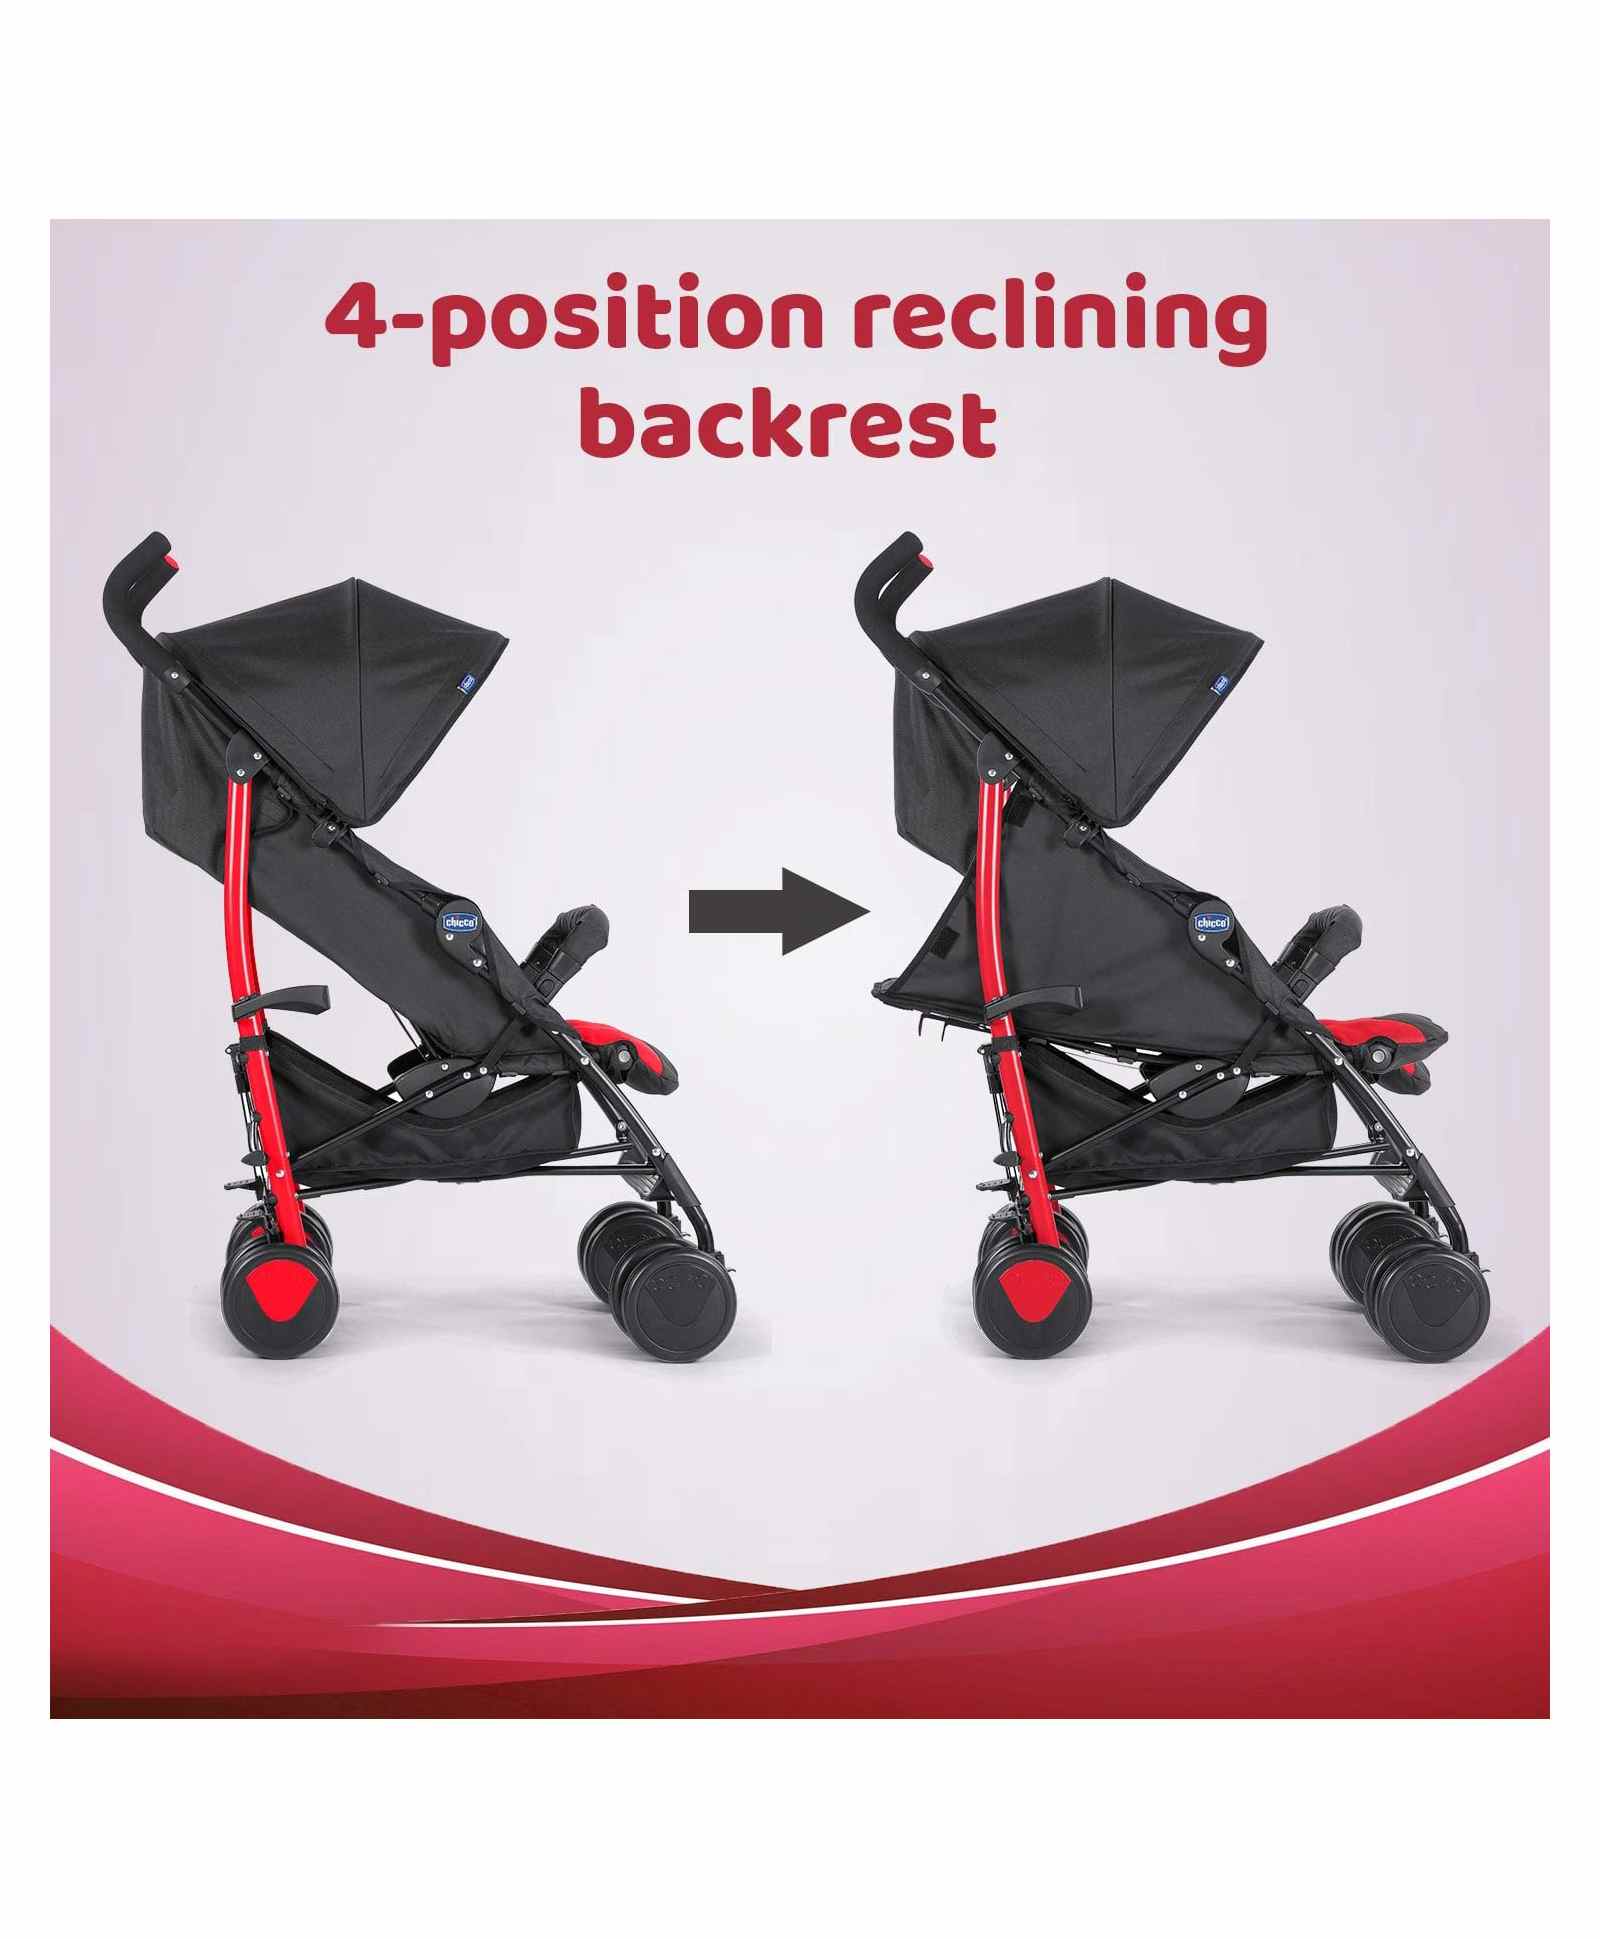 Chicco New Echo Stroller With Bumper Bar Scarlet Red & Black Online India, Buy at Best Price from FirstCry.com - 2090733